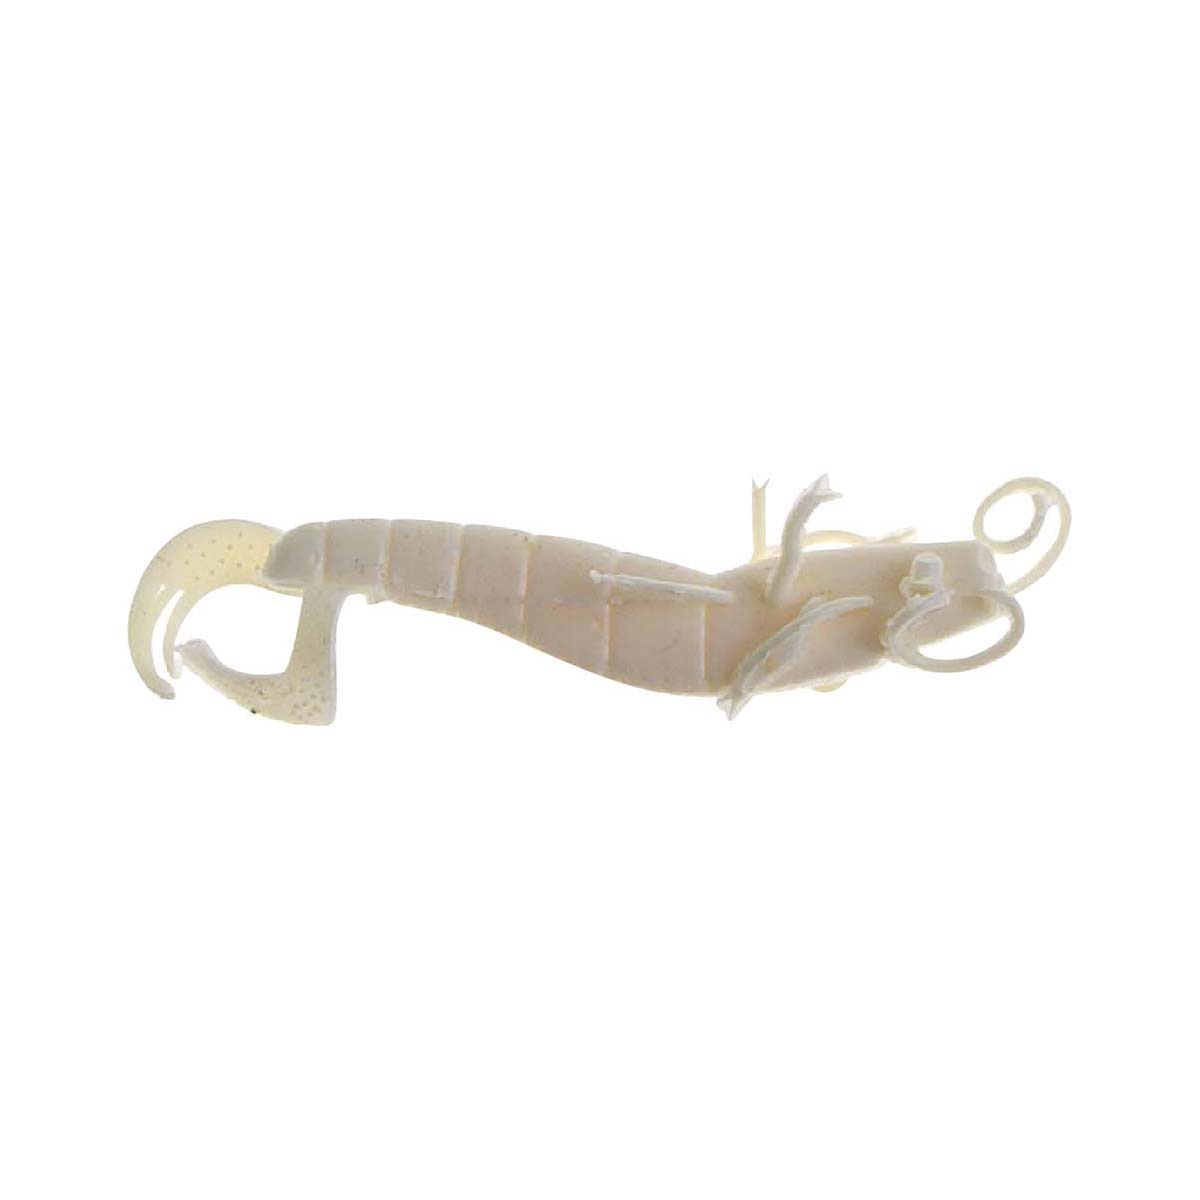 Atomic Plazos Prong Soft Plastic Lure 4in White